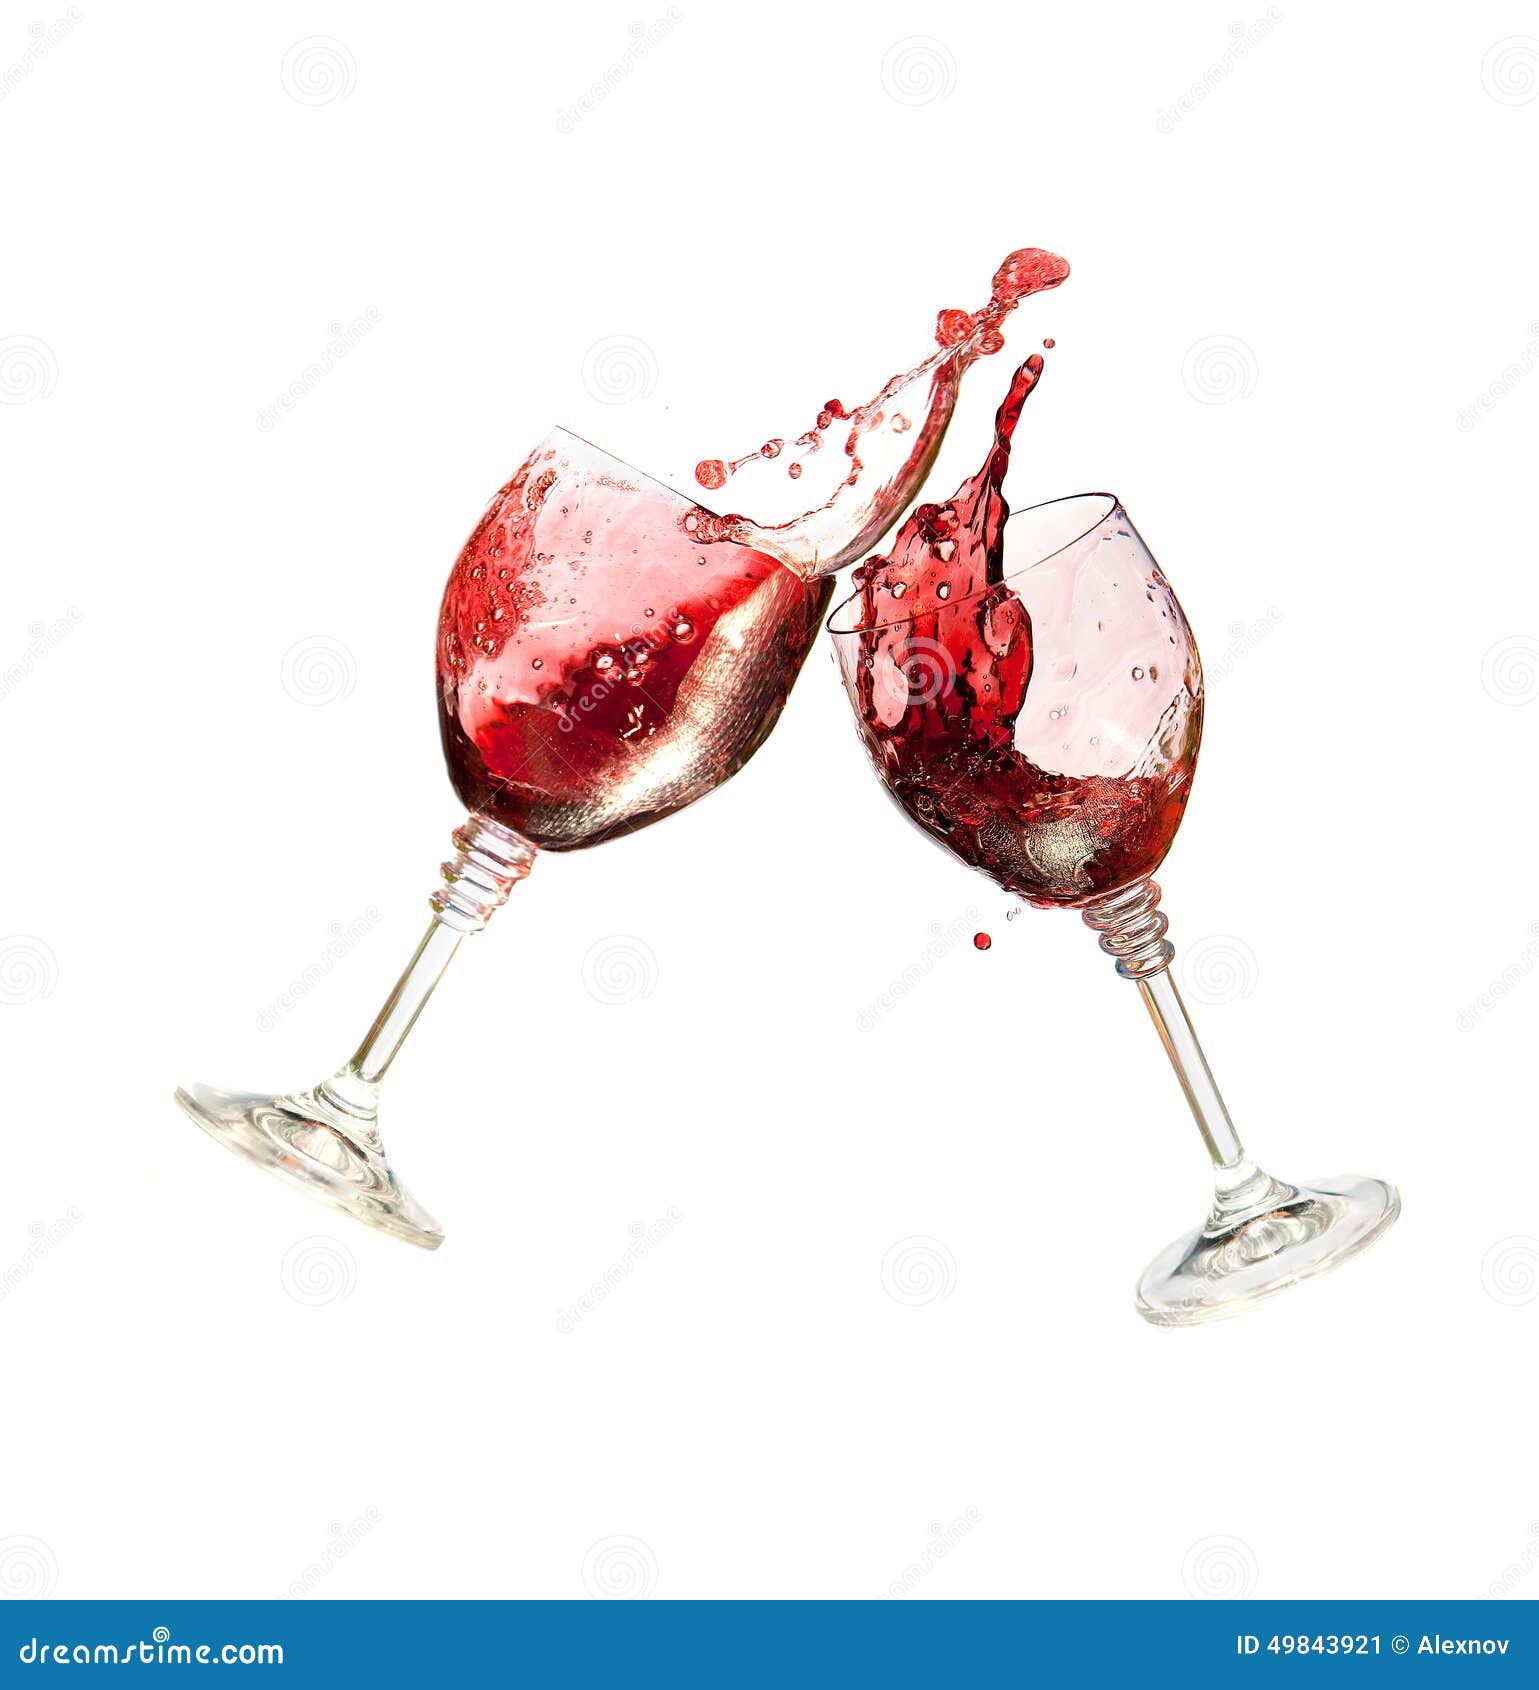 Cheers Two Red Wine Glasses, Toast by Domin domin